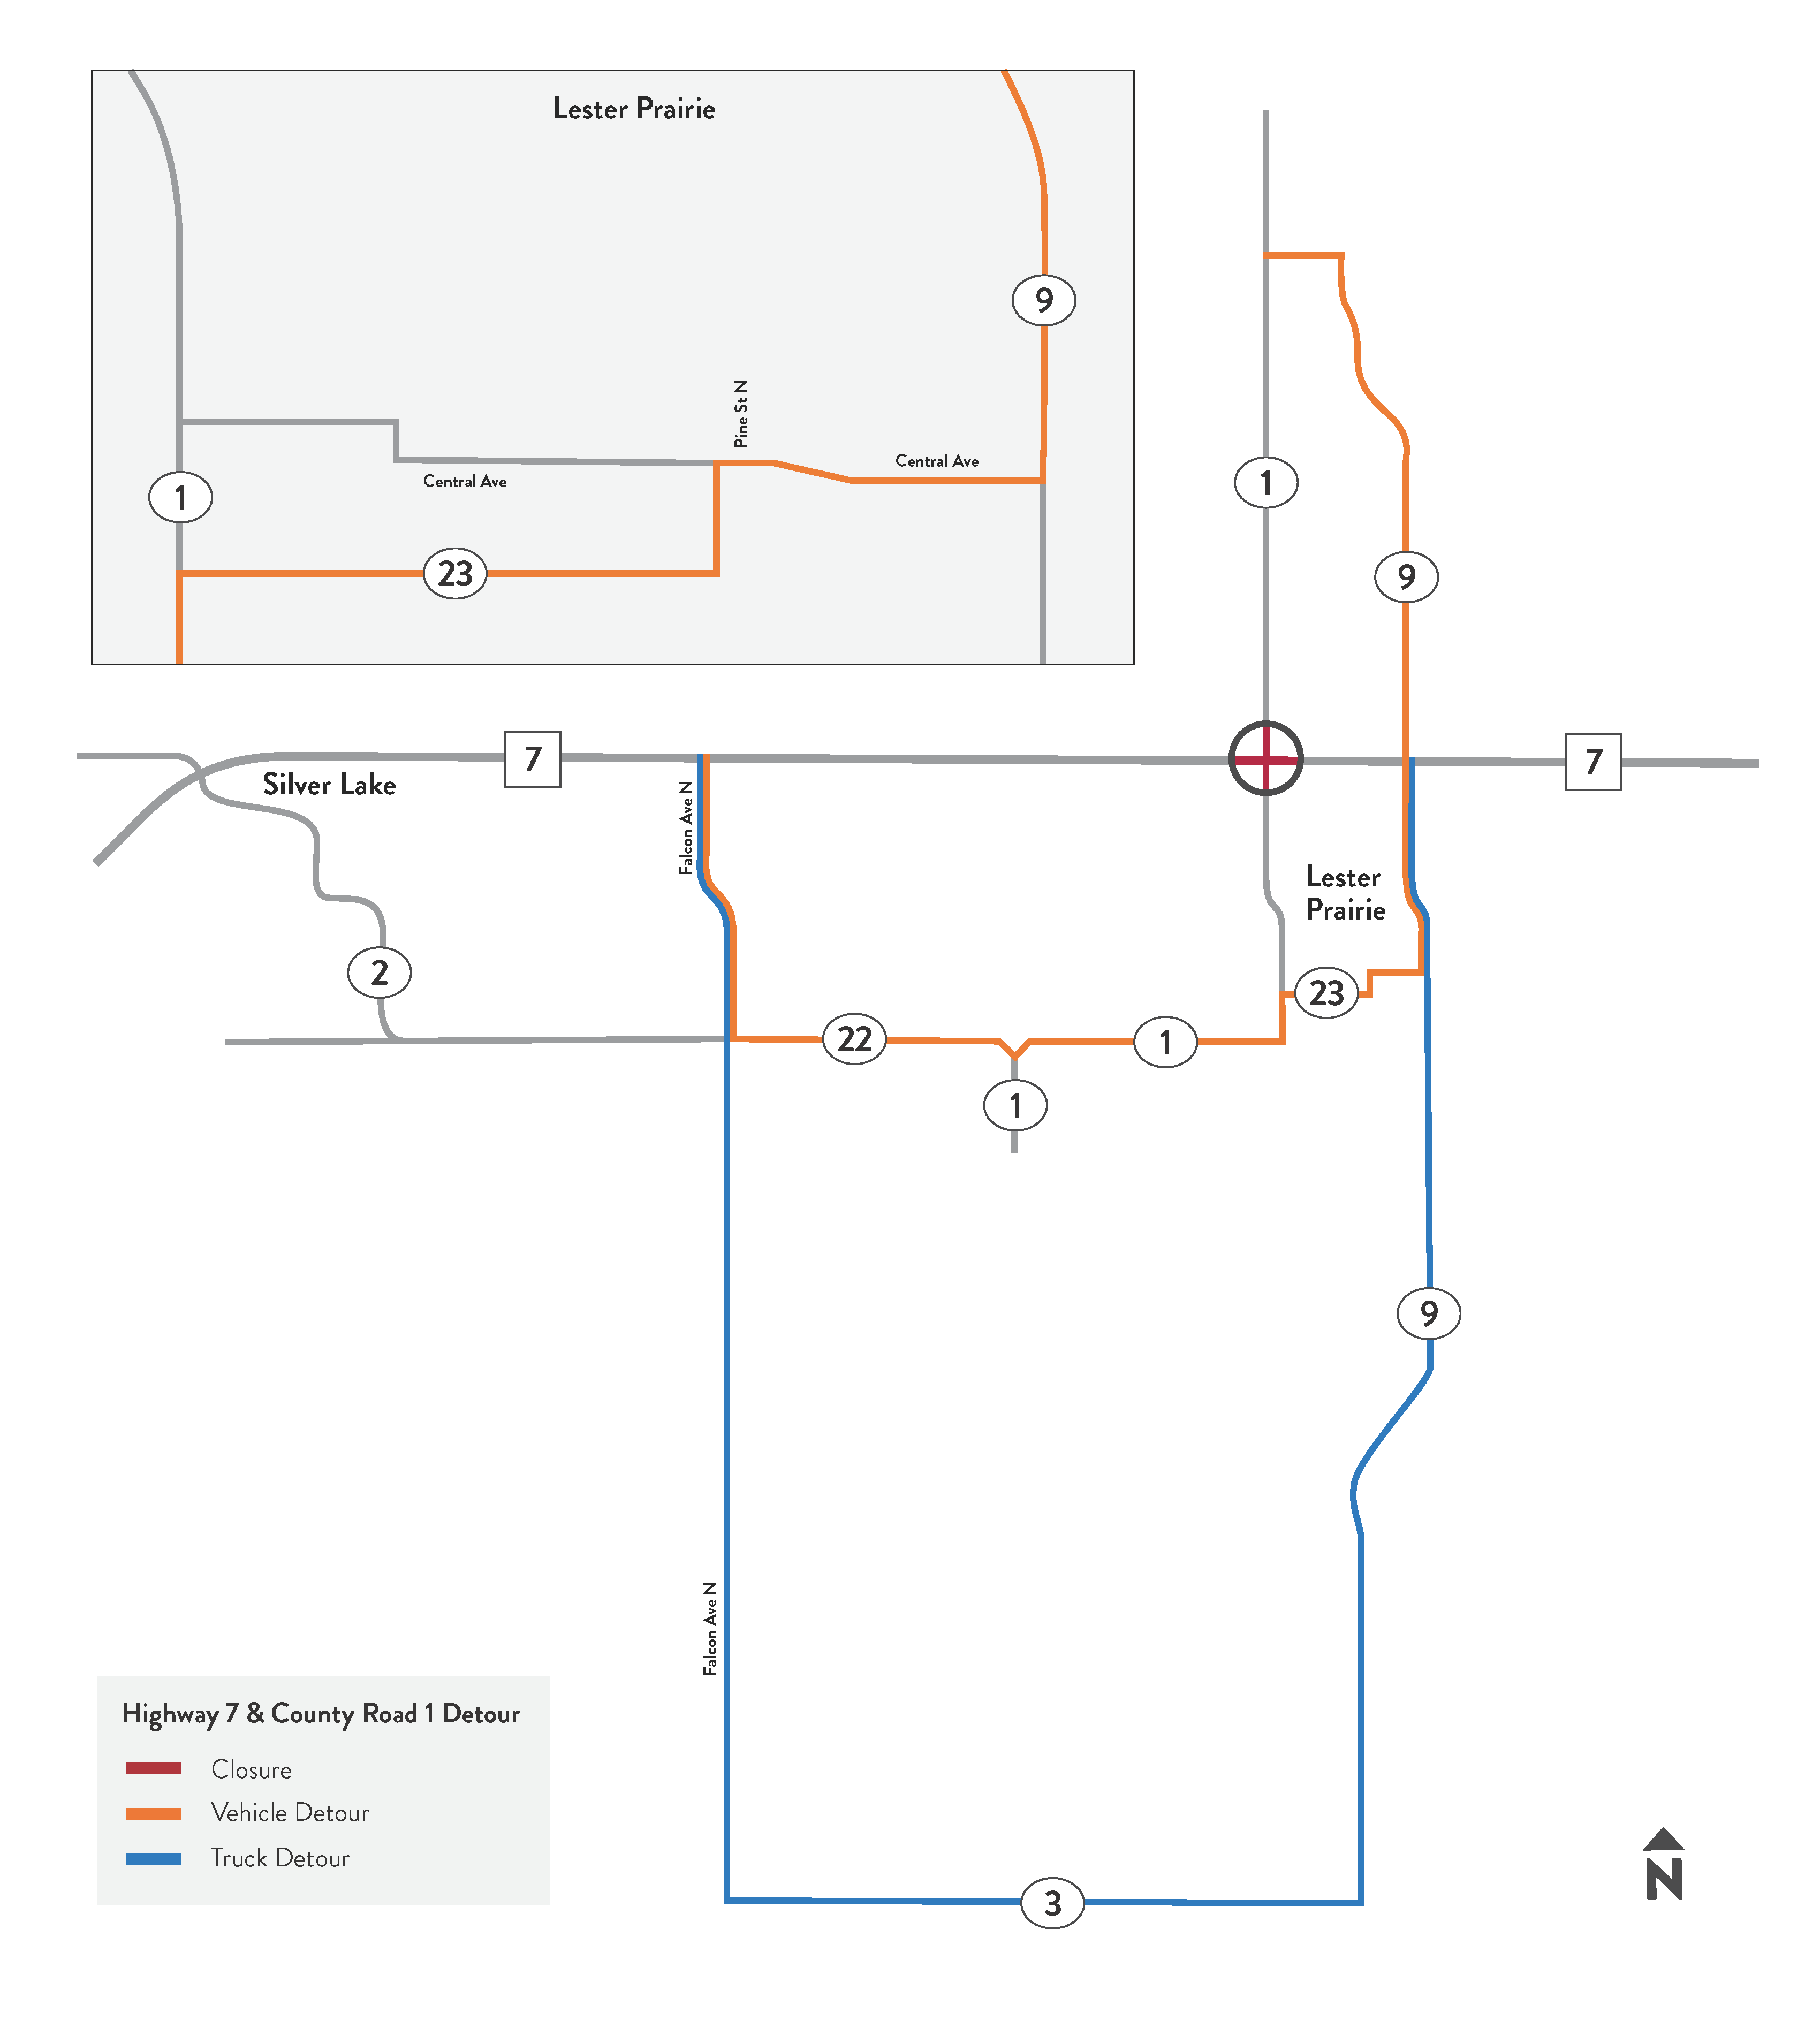 Graphic of the Highway 7 detour route